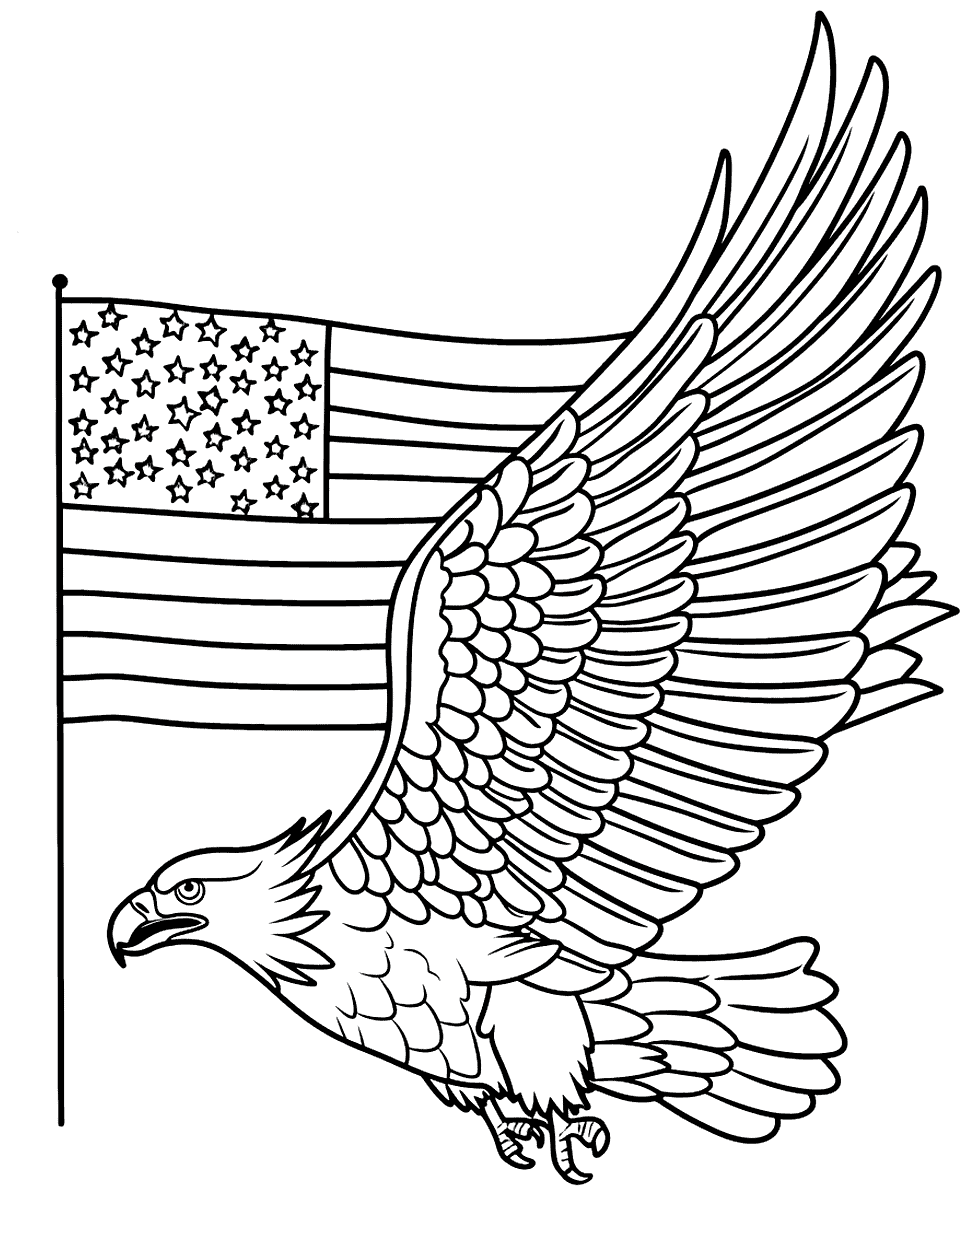 Bald Eagle and Flag American Coloring Page - A bald eagle flying with the American flag behind it.